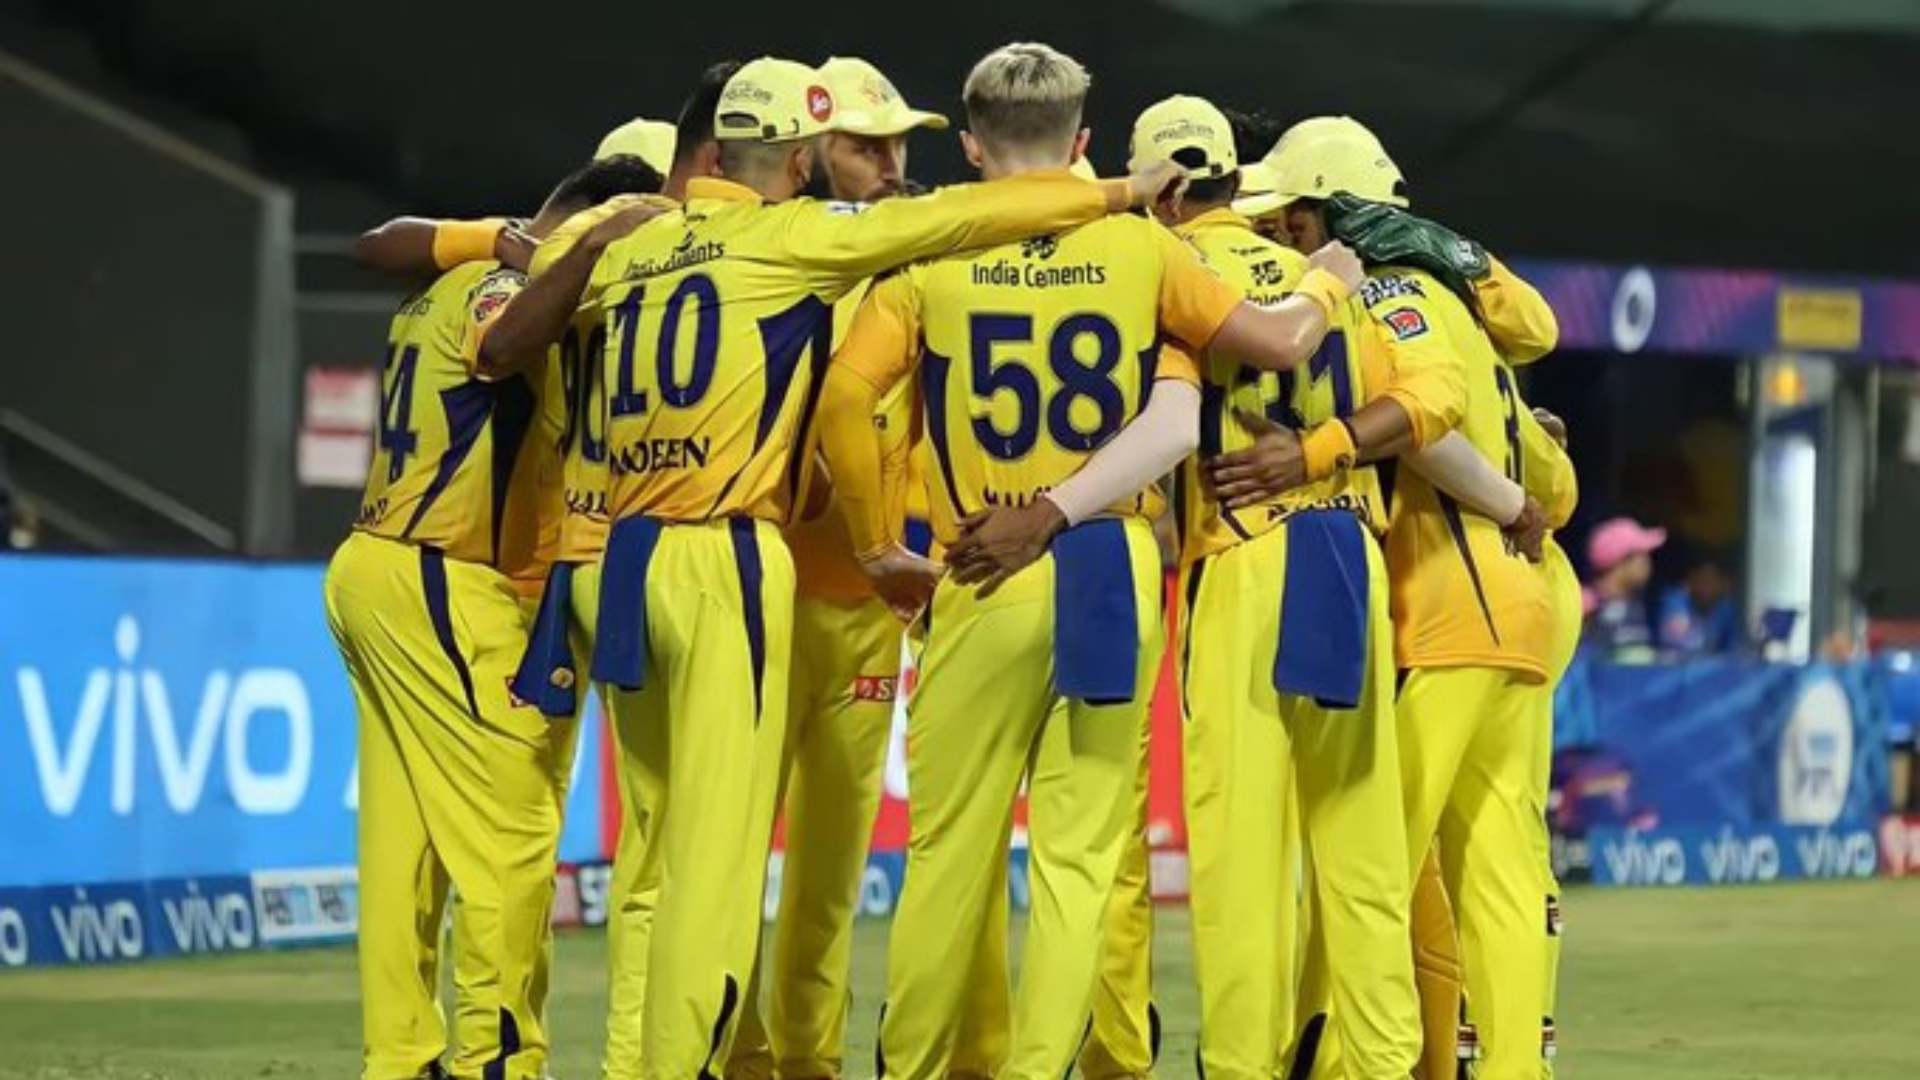 Chennai Super Kings will remain on top of the table if they beat Sunrisers Hyderabad.